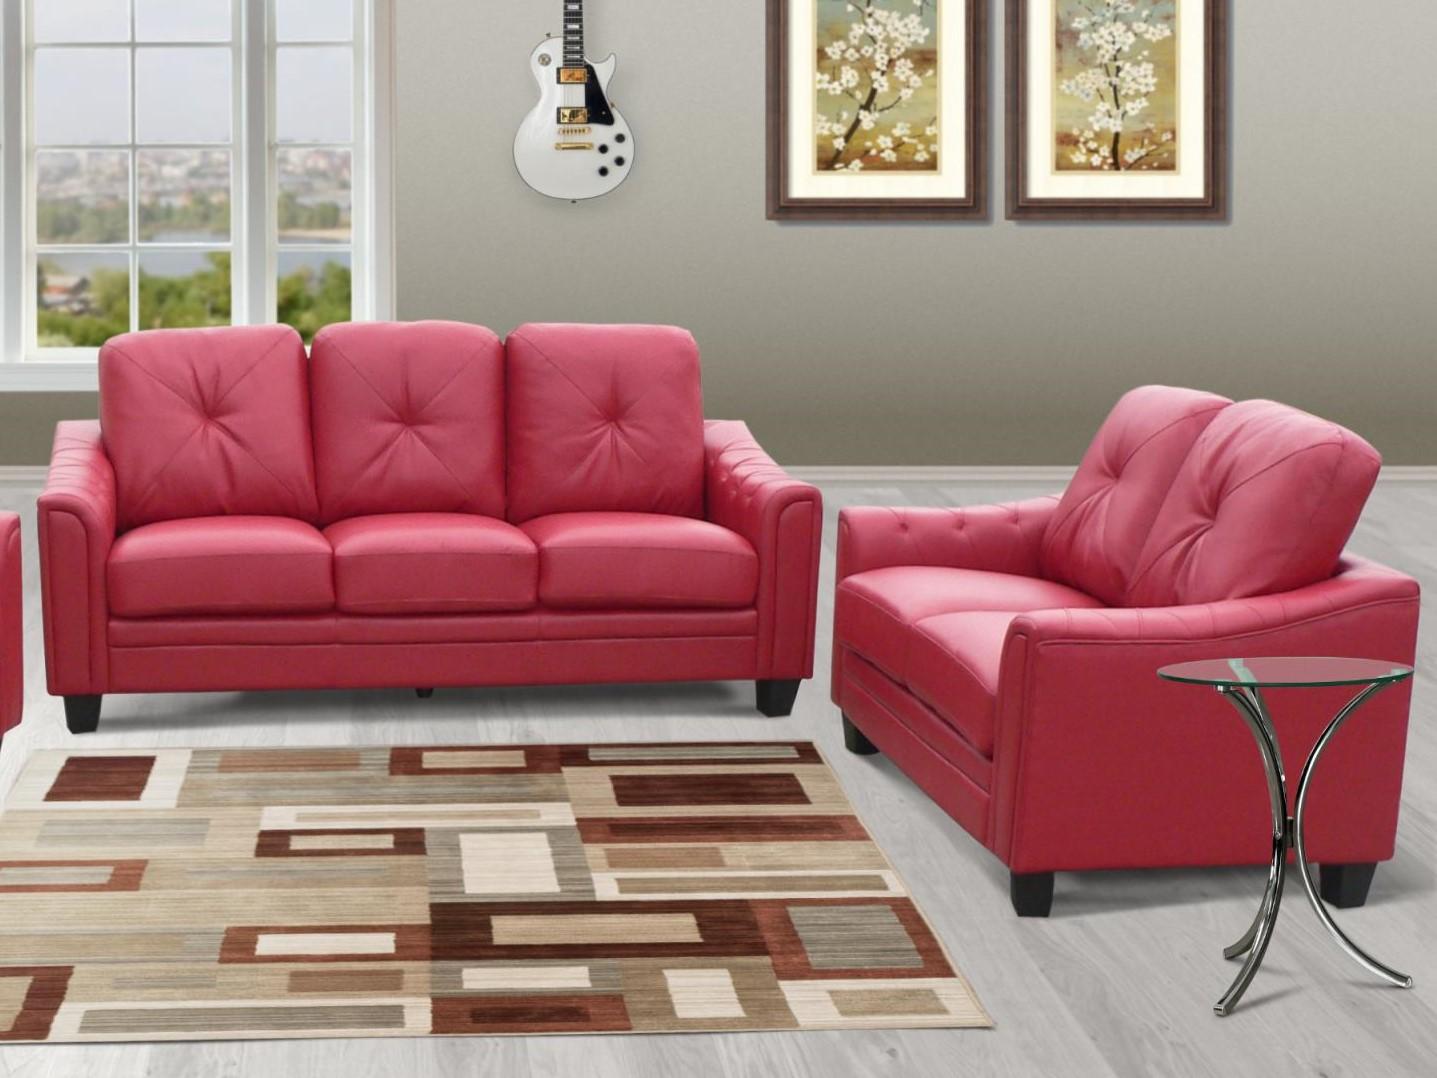 

    
MYCO Furniture Walden Red Bonded Leather Living Room Sofa Set 2 Pcs Contemporary
